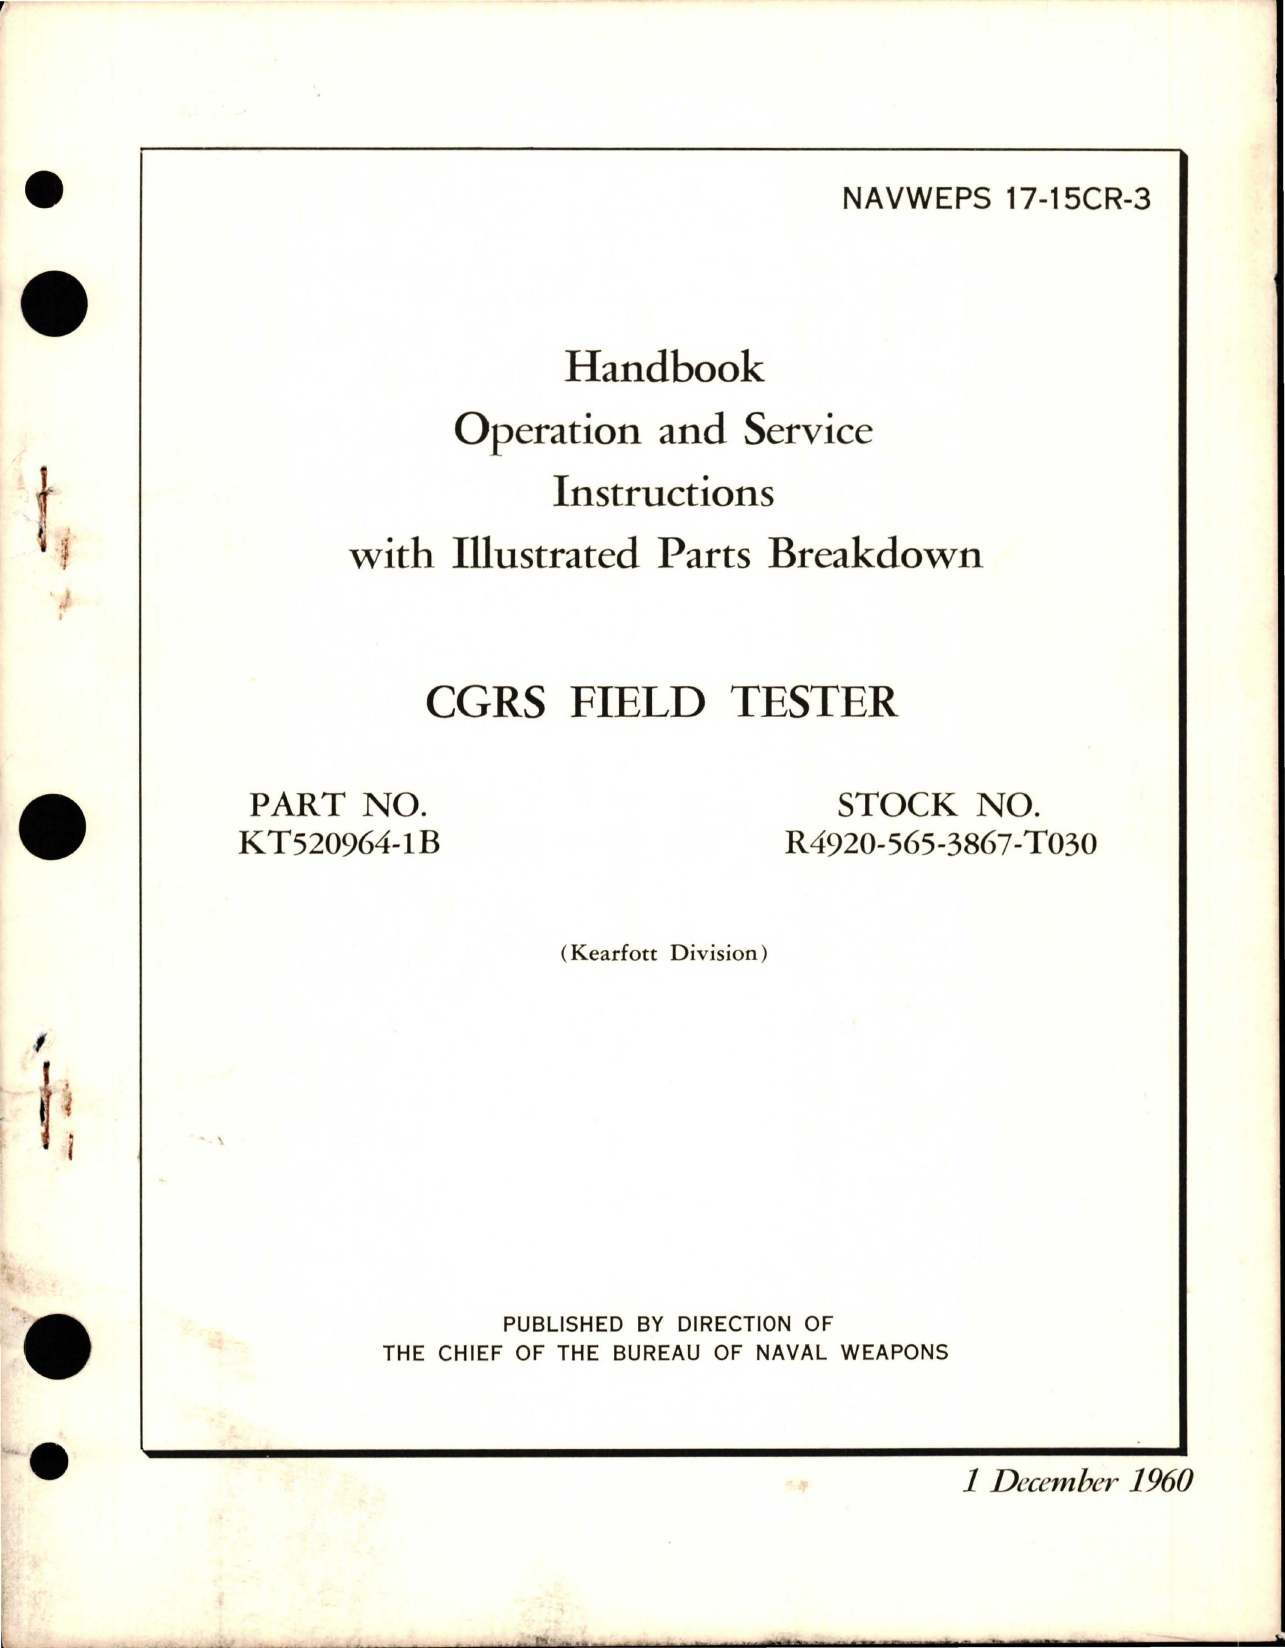 Sample page 1 from AirCorps Library document: Operation and Service Instructions with Illustrated Parts Breakdown for CGRS Field Tester - Part KT520964-1B